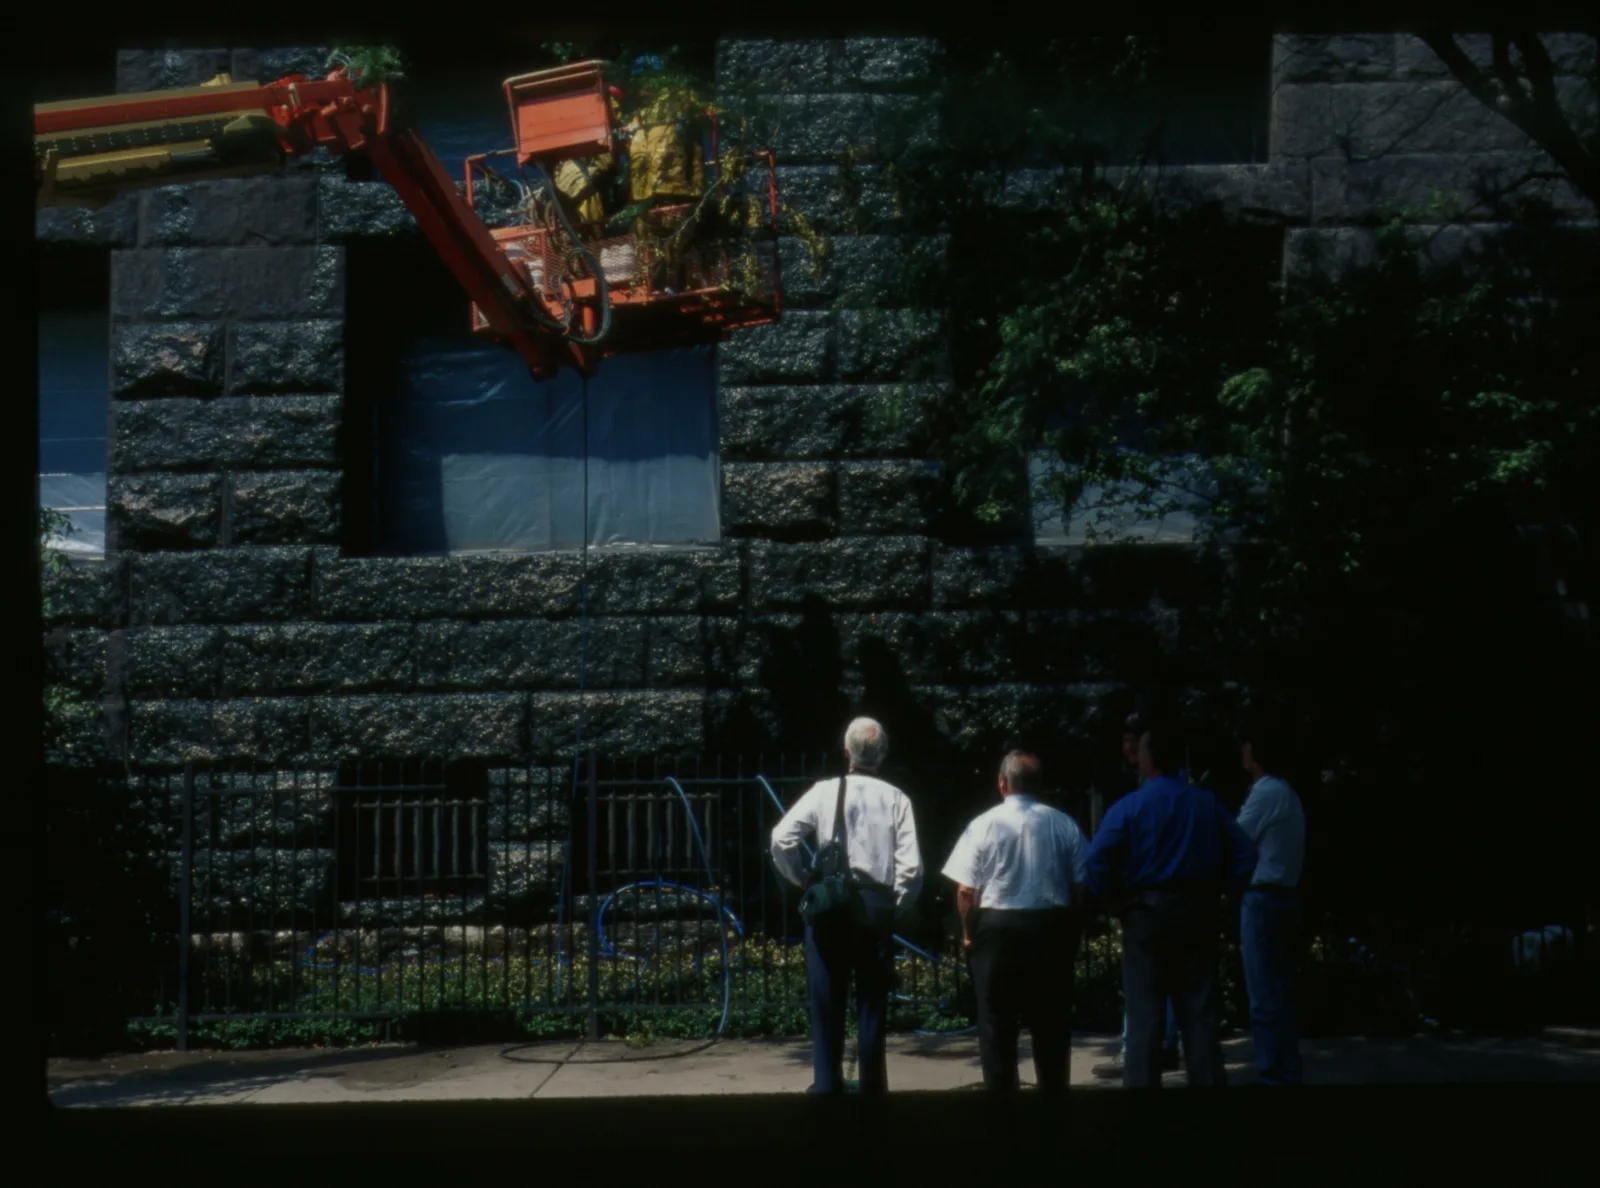 Four people stand on a sidewalk in front of the Newberry. A cherry-picker crane extends out from the left.